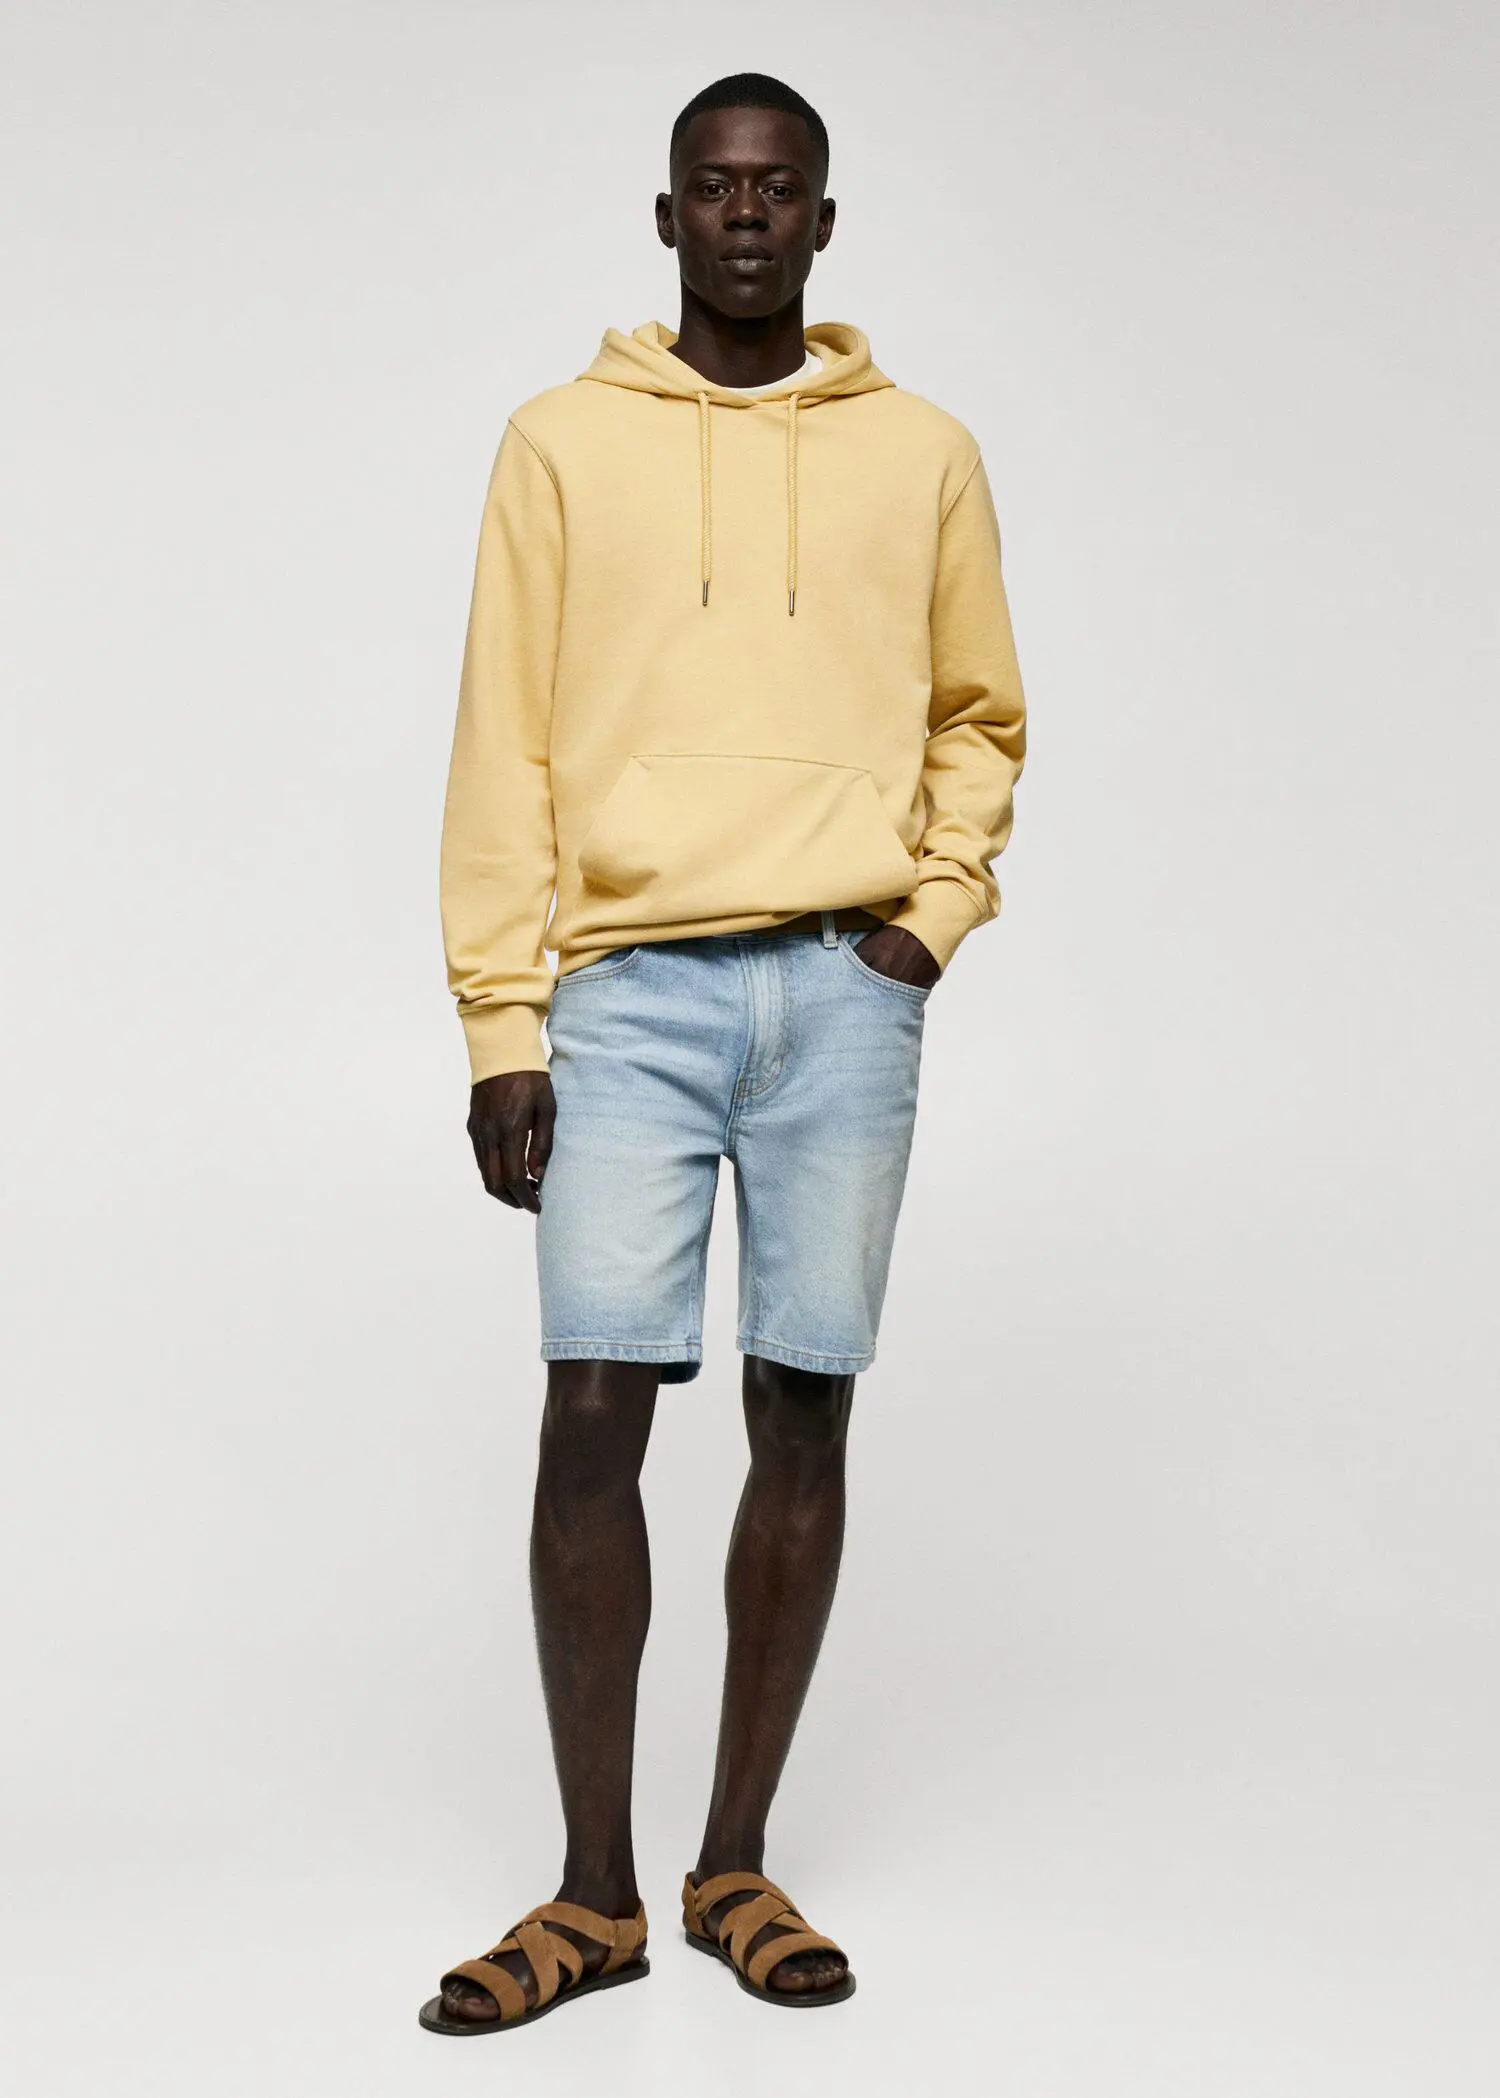 Mango Hoodie cotton sweatshirt. a man in a yellow hoodie and blue shorts. 